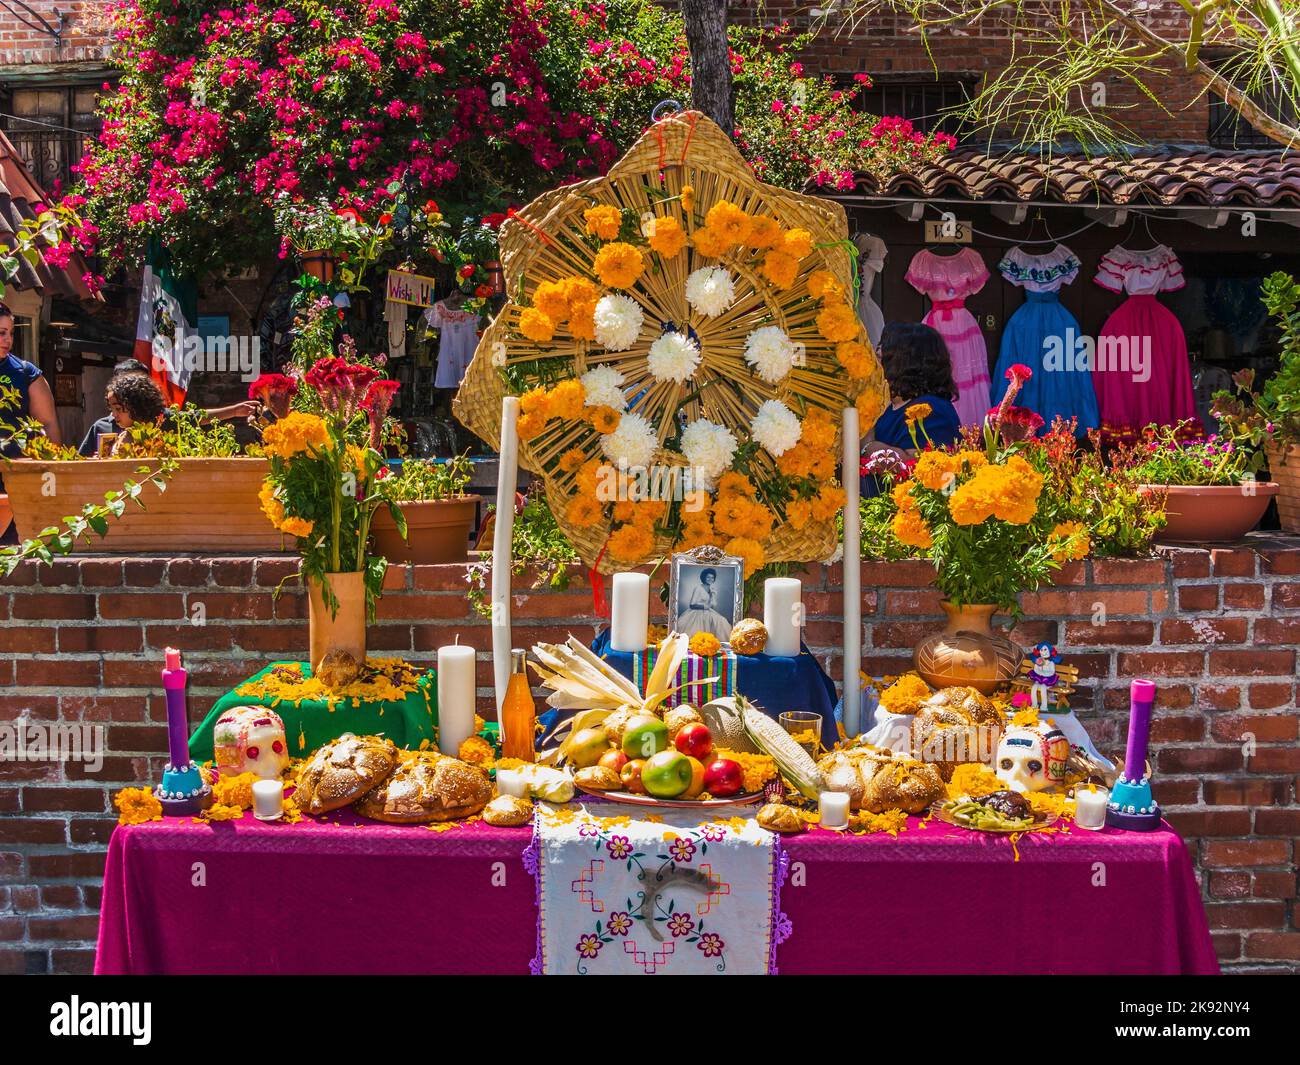 Los Angeles, USA - July 5, 2008: altar for the deads at Olvera street in los Angeles, USA. The mecican traditional culture is still alive in that typi Stock Photo